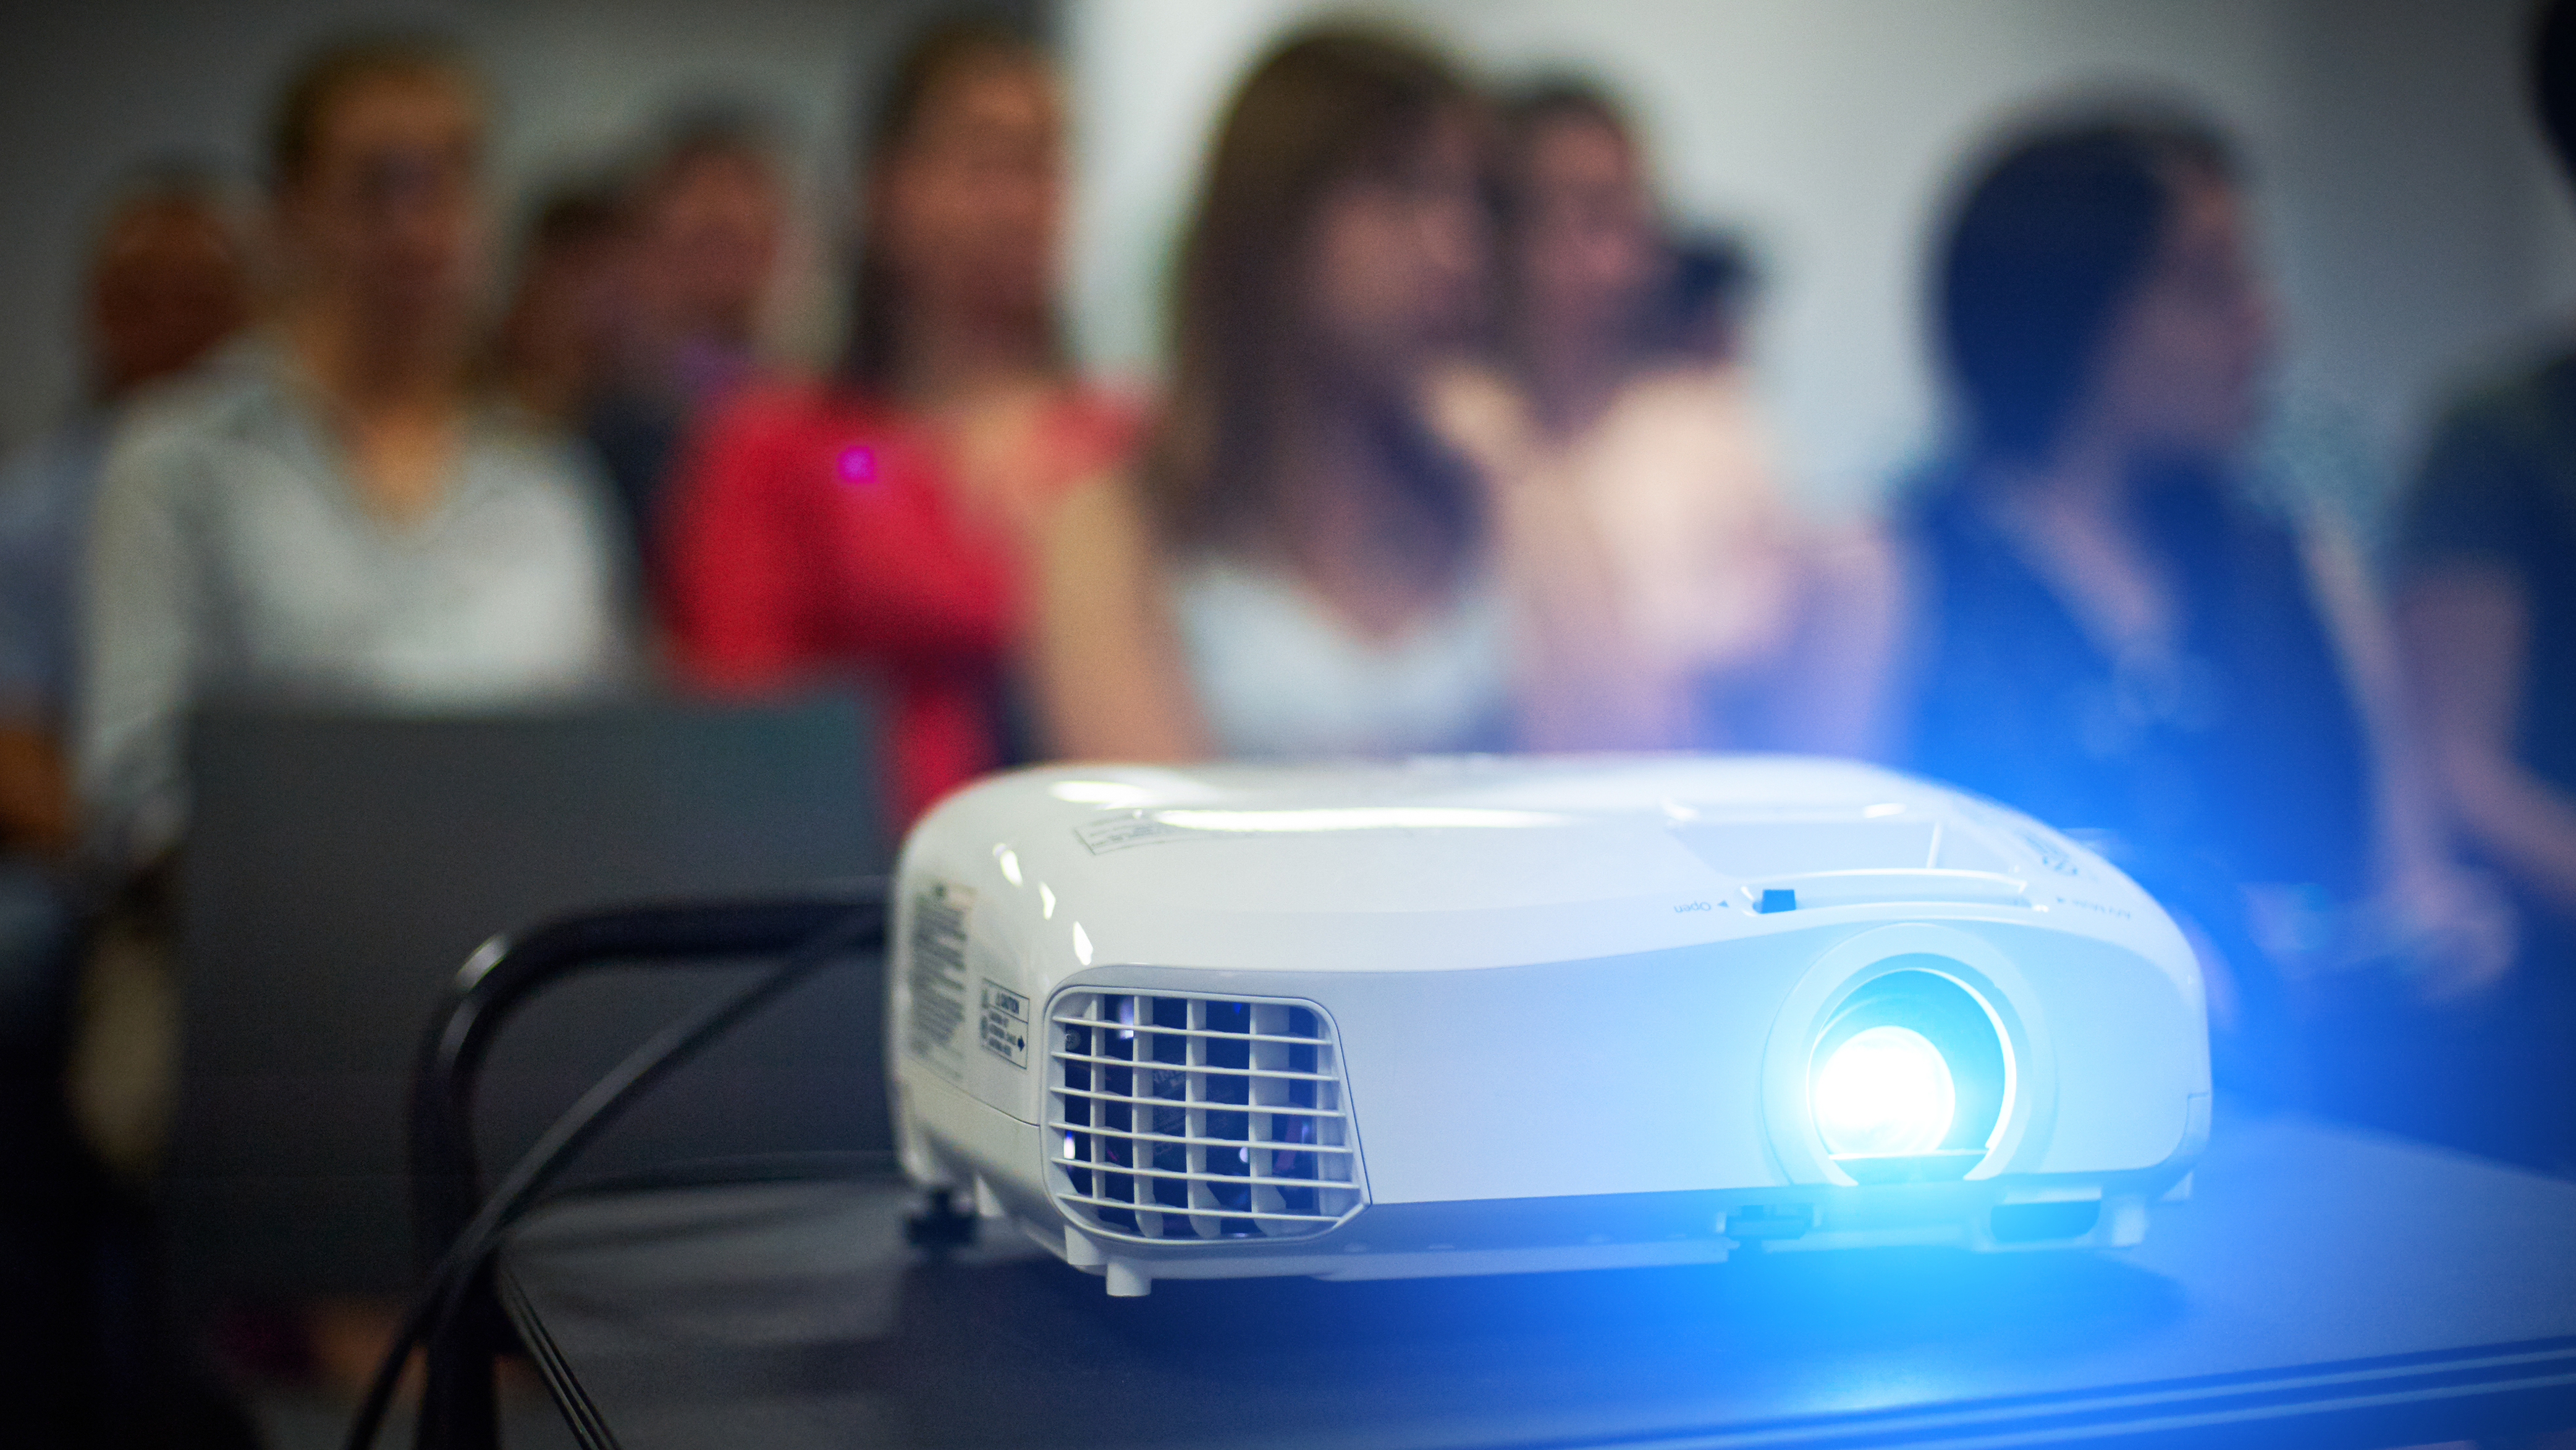 Projector Sexual Video - Using Videos in the Classroom to Amplify Learning | Edutopia